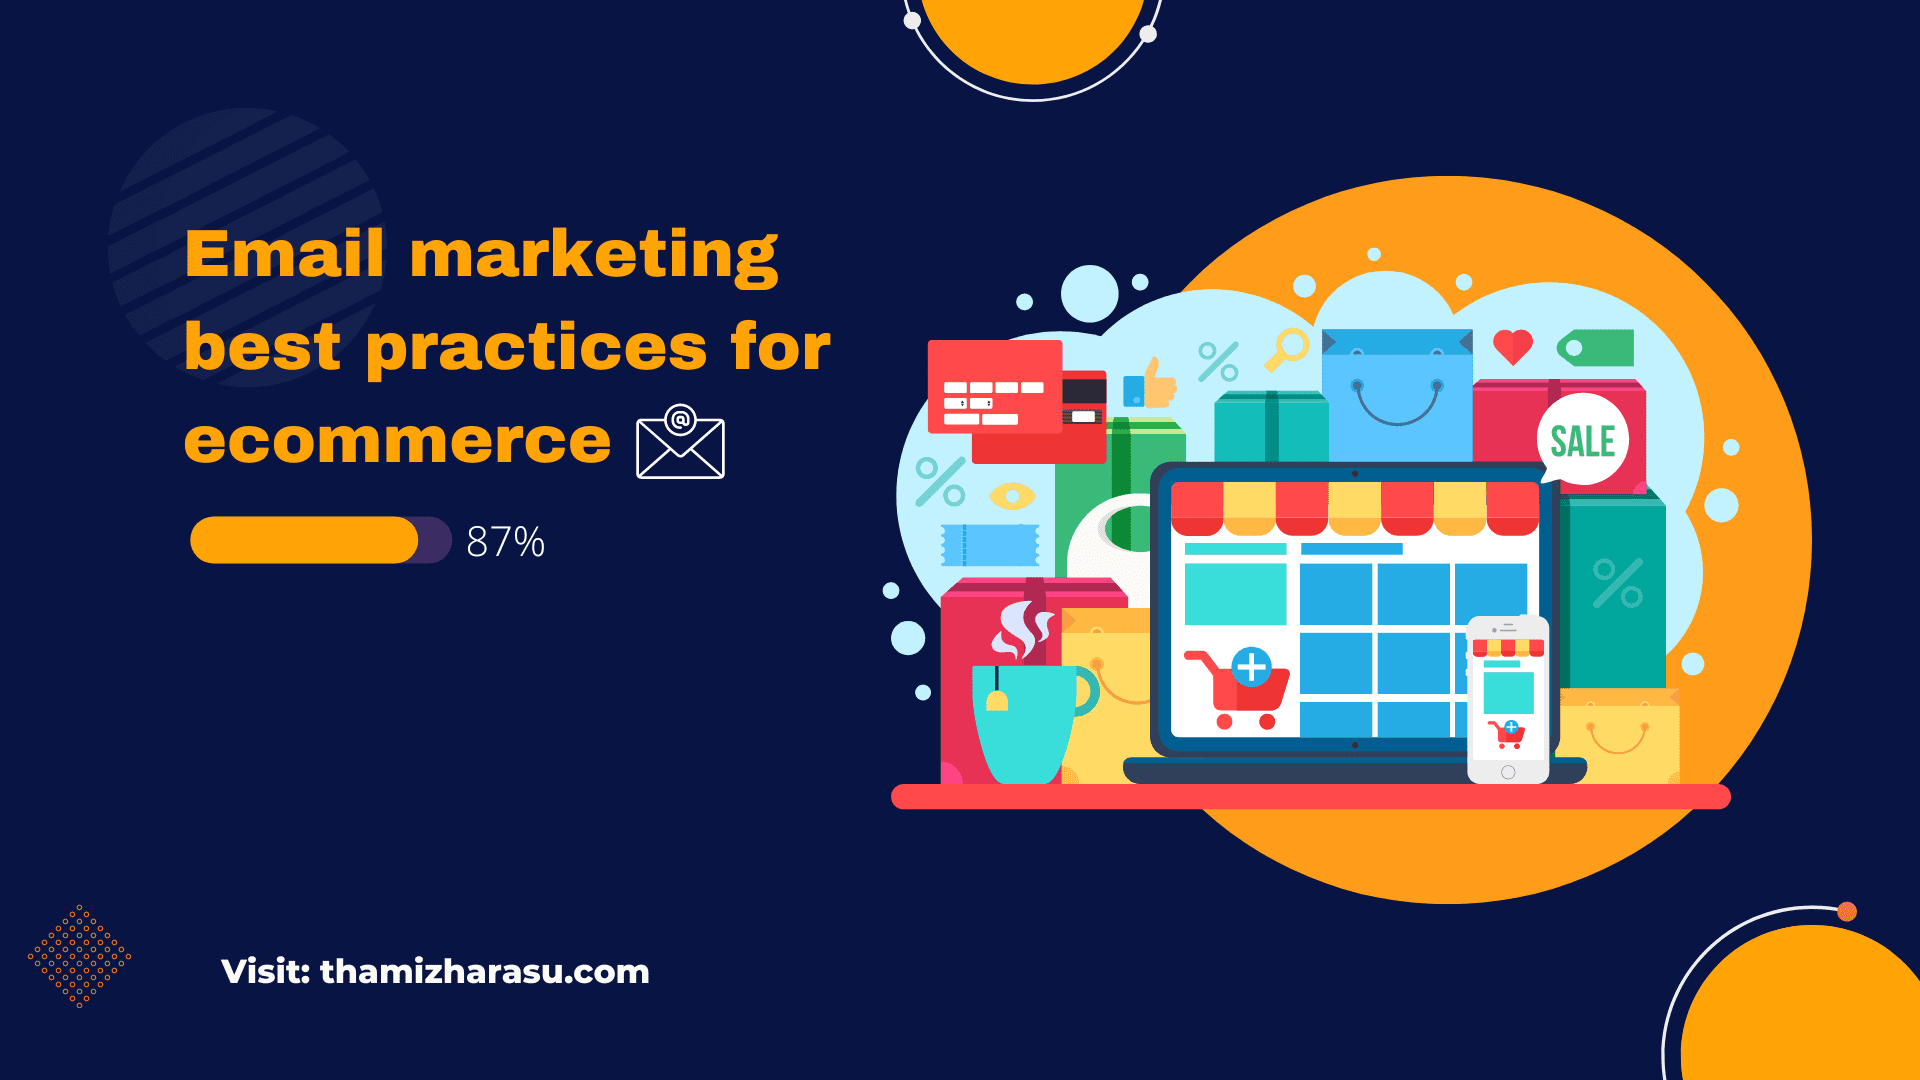 Email marketing best practices for ecommerce